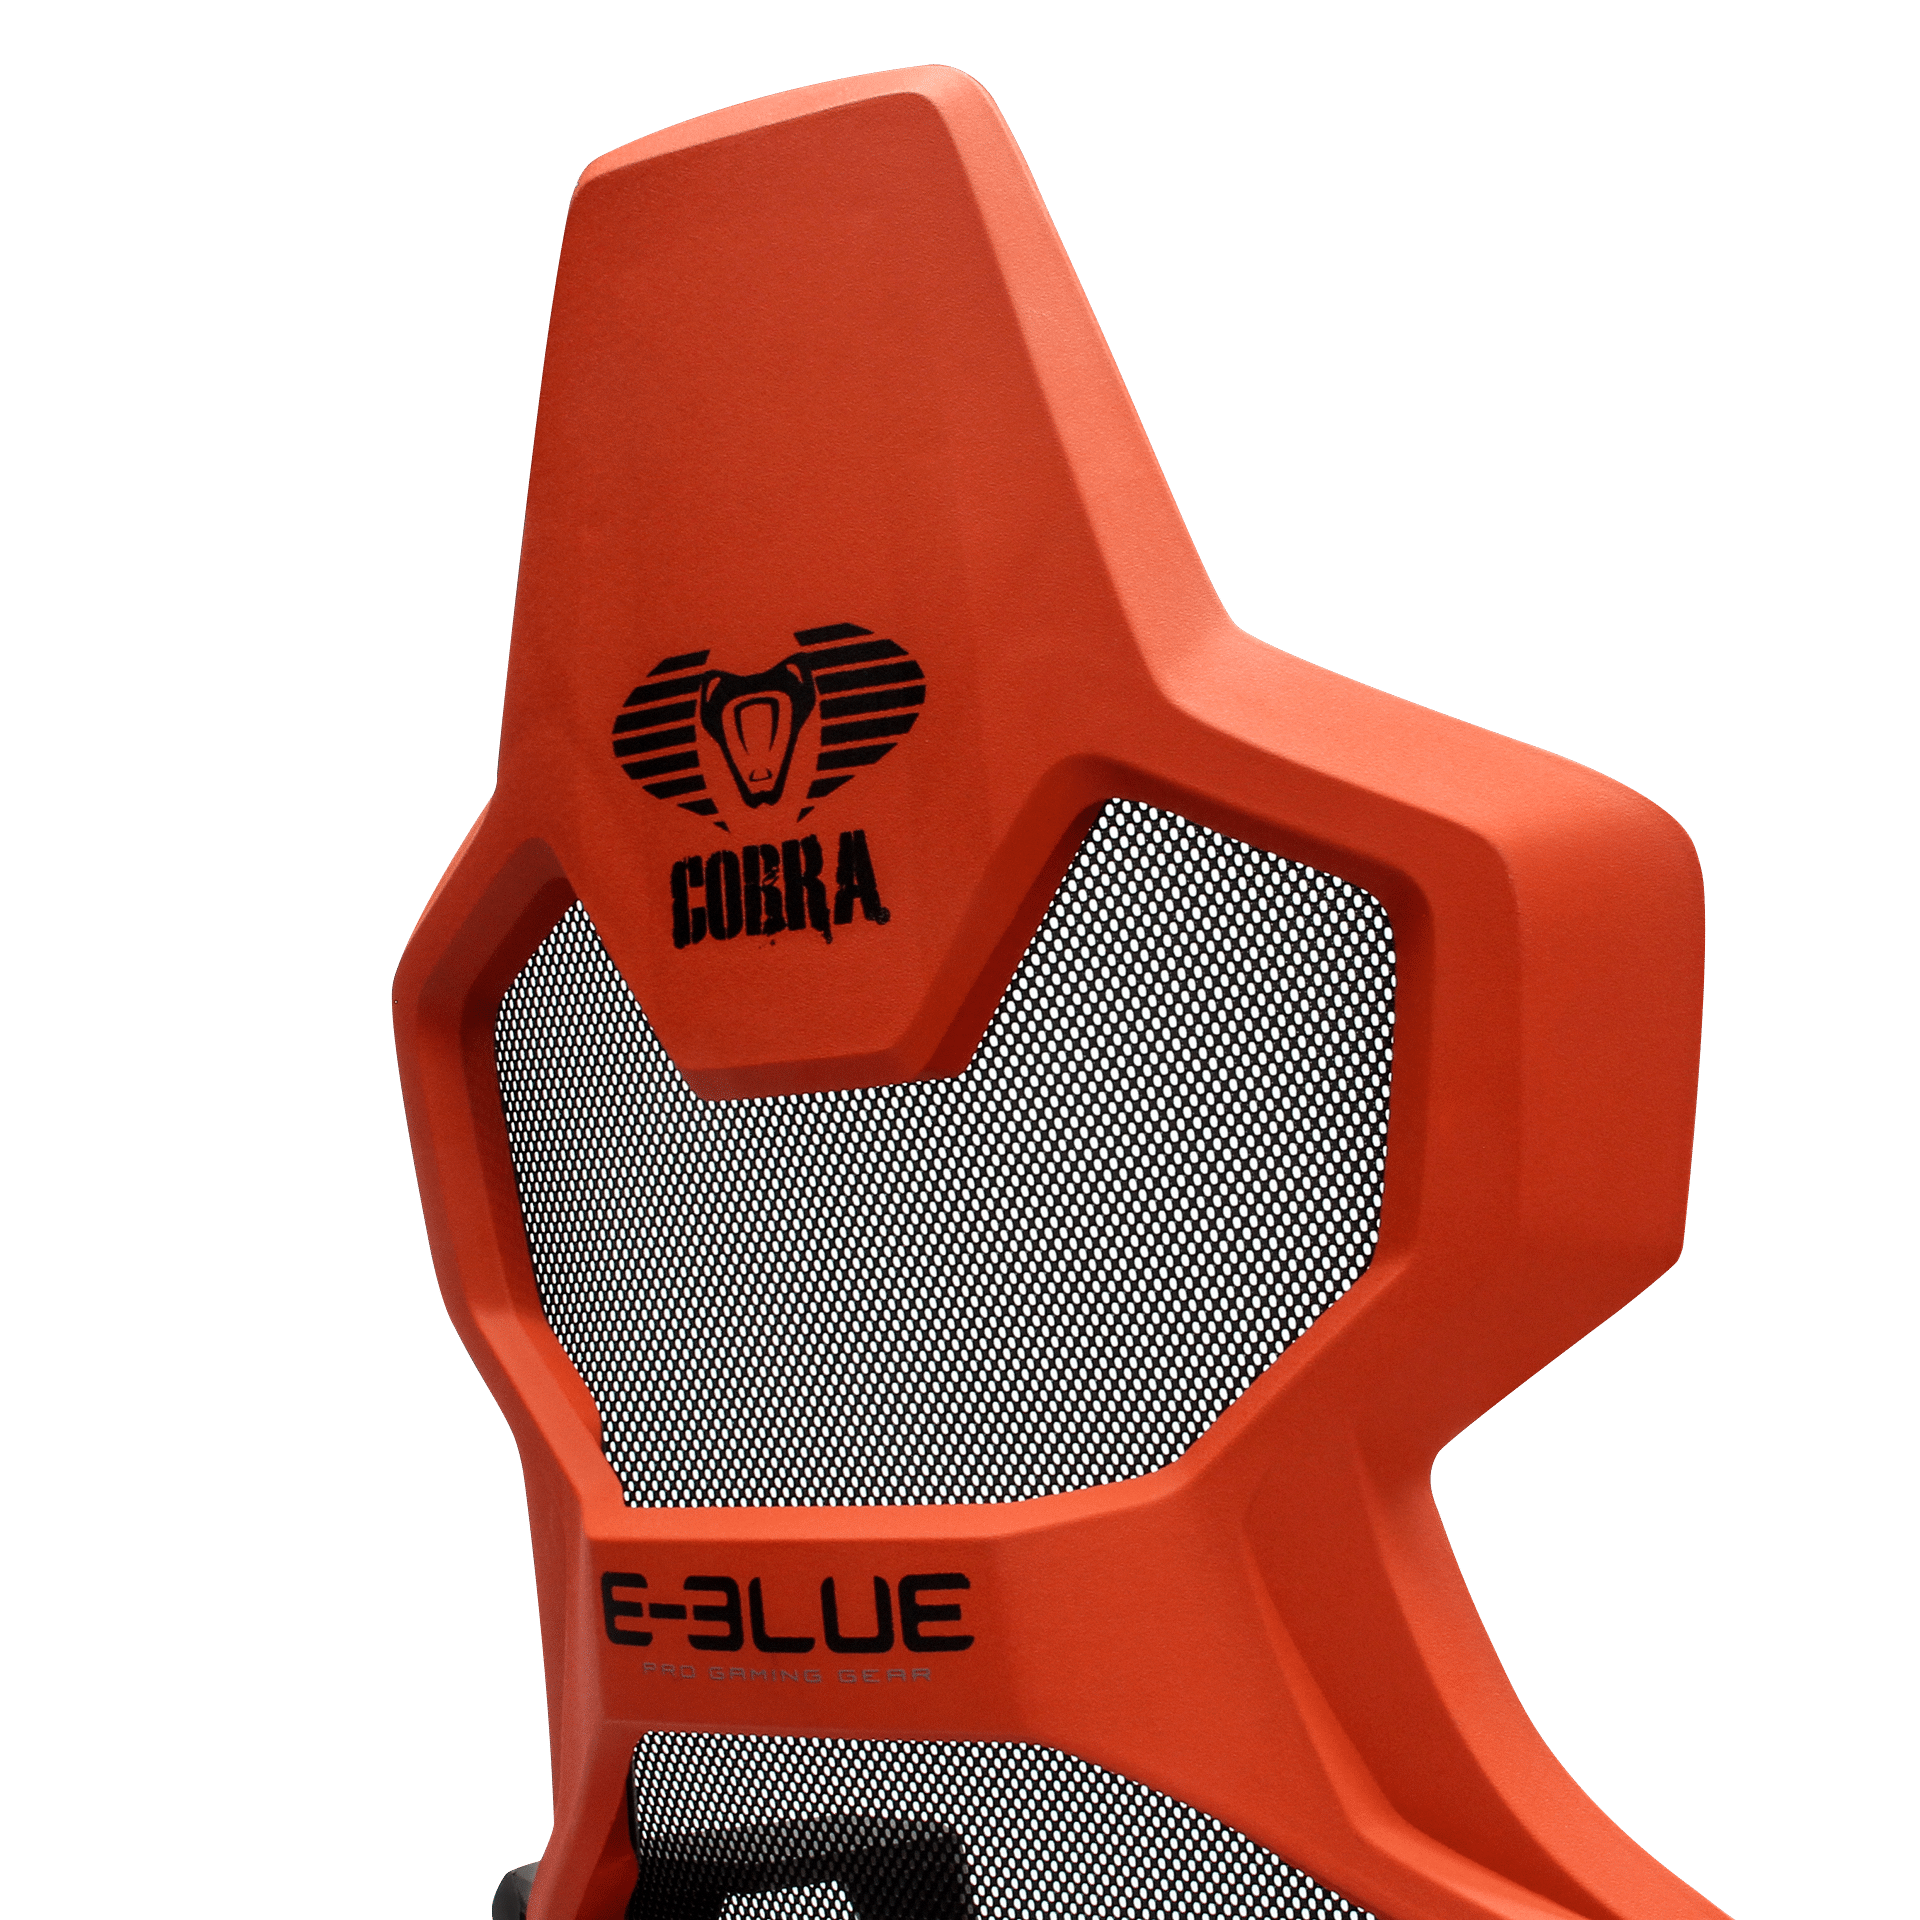 Fauteuil Gamer Cobra EEC313RE - E-Blue Gaming France - Equipements Mobilier  Gaming / E-Sport - Accessoires pour Gamer